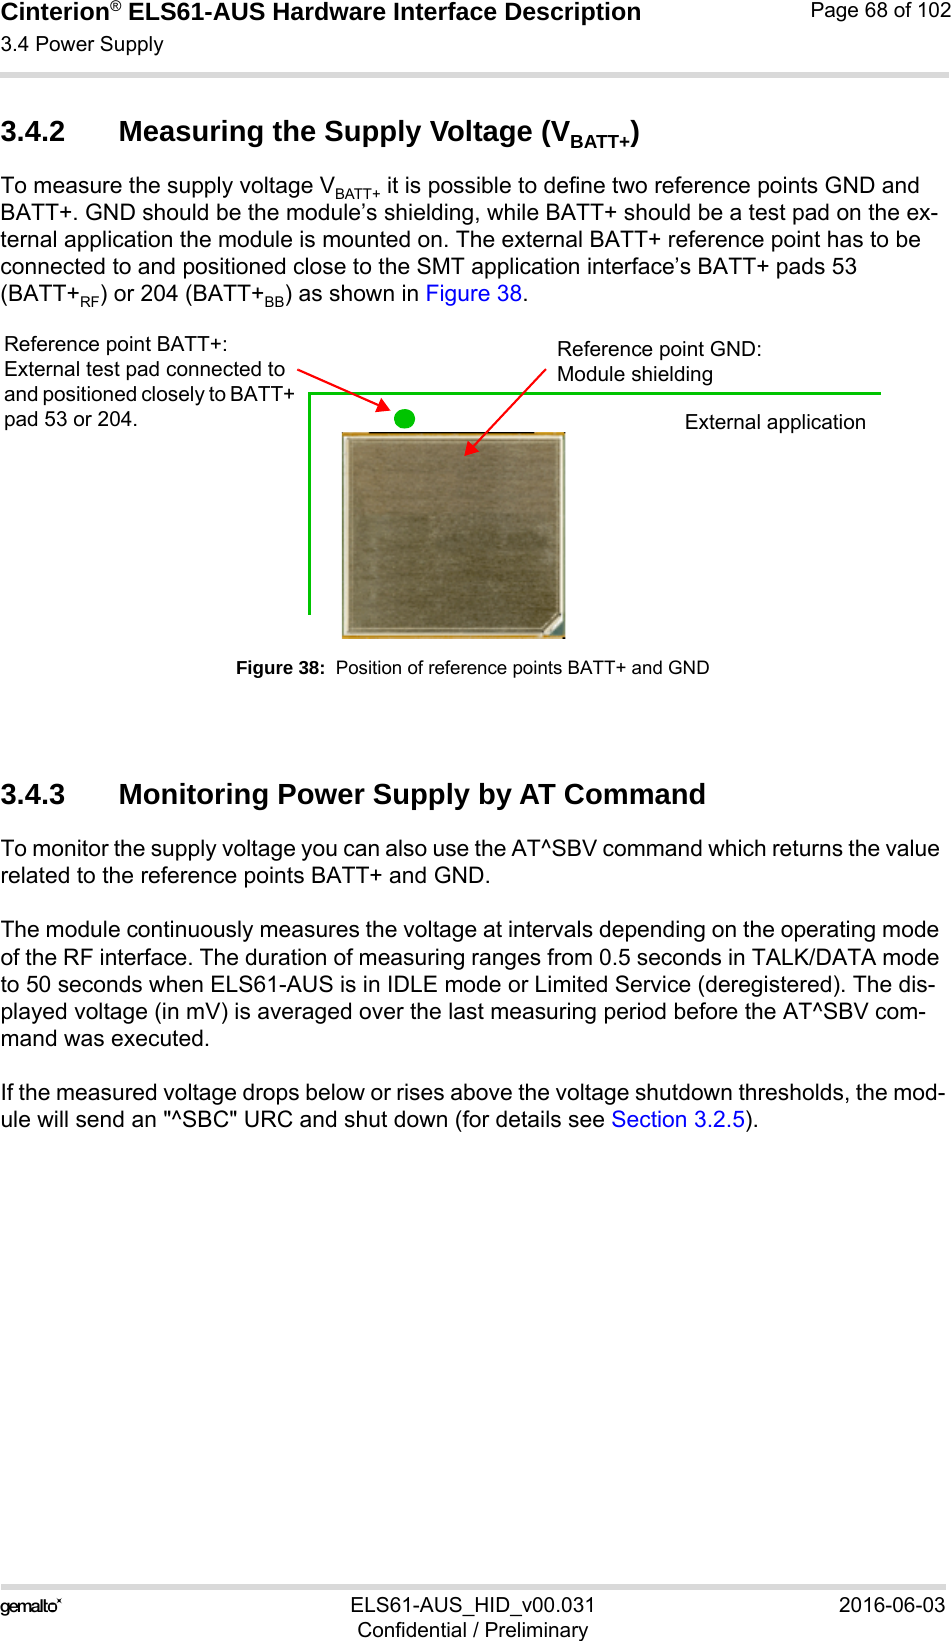 Cinterion® ELS61-AUS Hardware Interface Description3.4 Power Supply73ELS61-AUS_HID_v00.031 2016-06-03Confidential / PreliminaryPage 68 of 1023.4.2 Measuring the Supply Voltage (VBATT+)To measure the supply voltage VBATT+ it is possible to define two reference points GND and BATT+. GND should be the module’s shielding, while BATT+ should be a test pad on the ex-ternal application the module is mounted on. The external BATT+ reference point has to be connected to and positioned close to the SMT application interface’s BATT+ pads 53 (BATT+RF) or 204 (BATT+BB) as shown in Figure 38.Figure 38:  Position of reference points BATT+ and GND3.4.3 Monitoring Power Supply by AT CommandTo monitor the supply voltage you can also use the AT^SBV command which returns the value related to the reference points BATT+ and GND. The module continuously measures the voltage at intervals depending on the operating mode of the RF interface. The duration of measuring ranges from 0.5 seconds in TALK/DATA mode to 50 seconds when ELS61-AUS is in IDLE mode or Limited Service (deregistered). The dis-played voltage (in mV) is averaged over the last measuring period before the AT^SBV com-mand was executed. If the measured voltage drops below or rises above the voltage shutdown thresholds, the mod-ule will send an &quot;^SBC&quot; URC and shut down (for details see Section 3.2.5).Reference point GND:Module shieldingReference point BATT+:External test pad connected to and positioned closely to BATT+ pad 53 or 204. External application